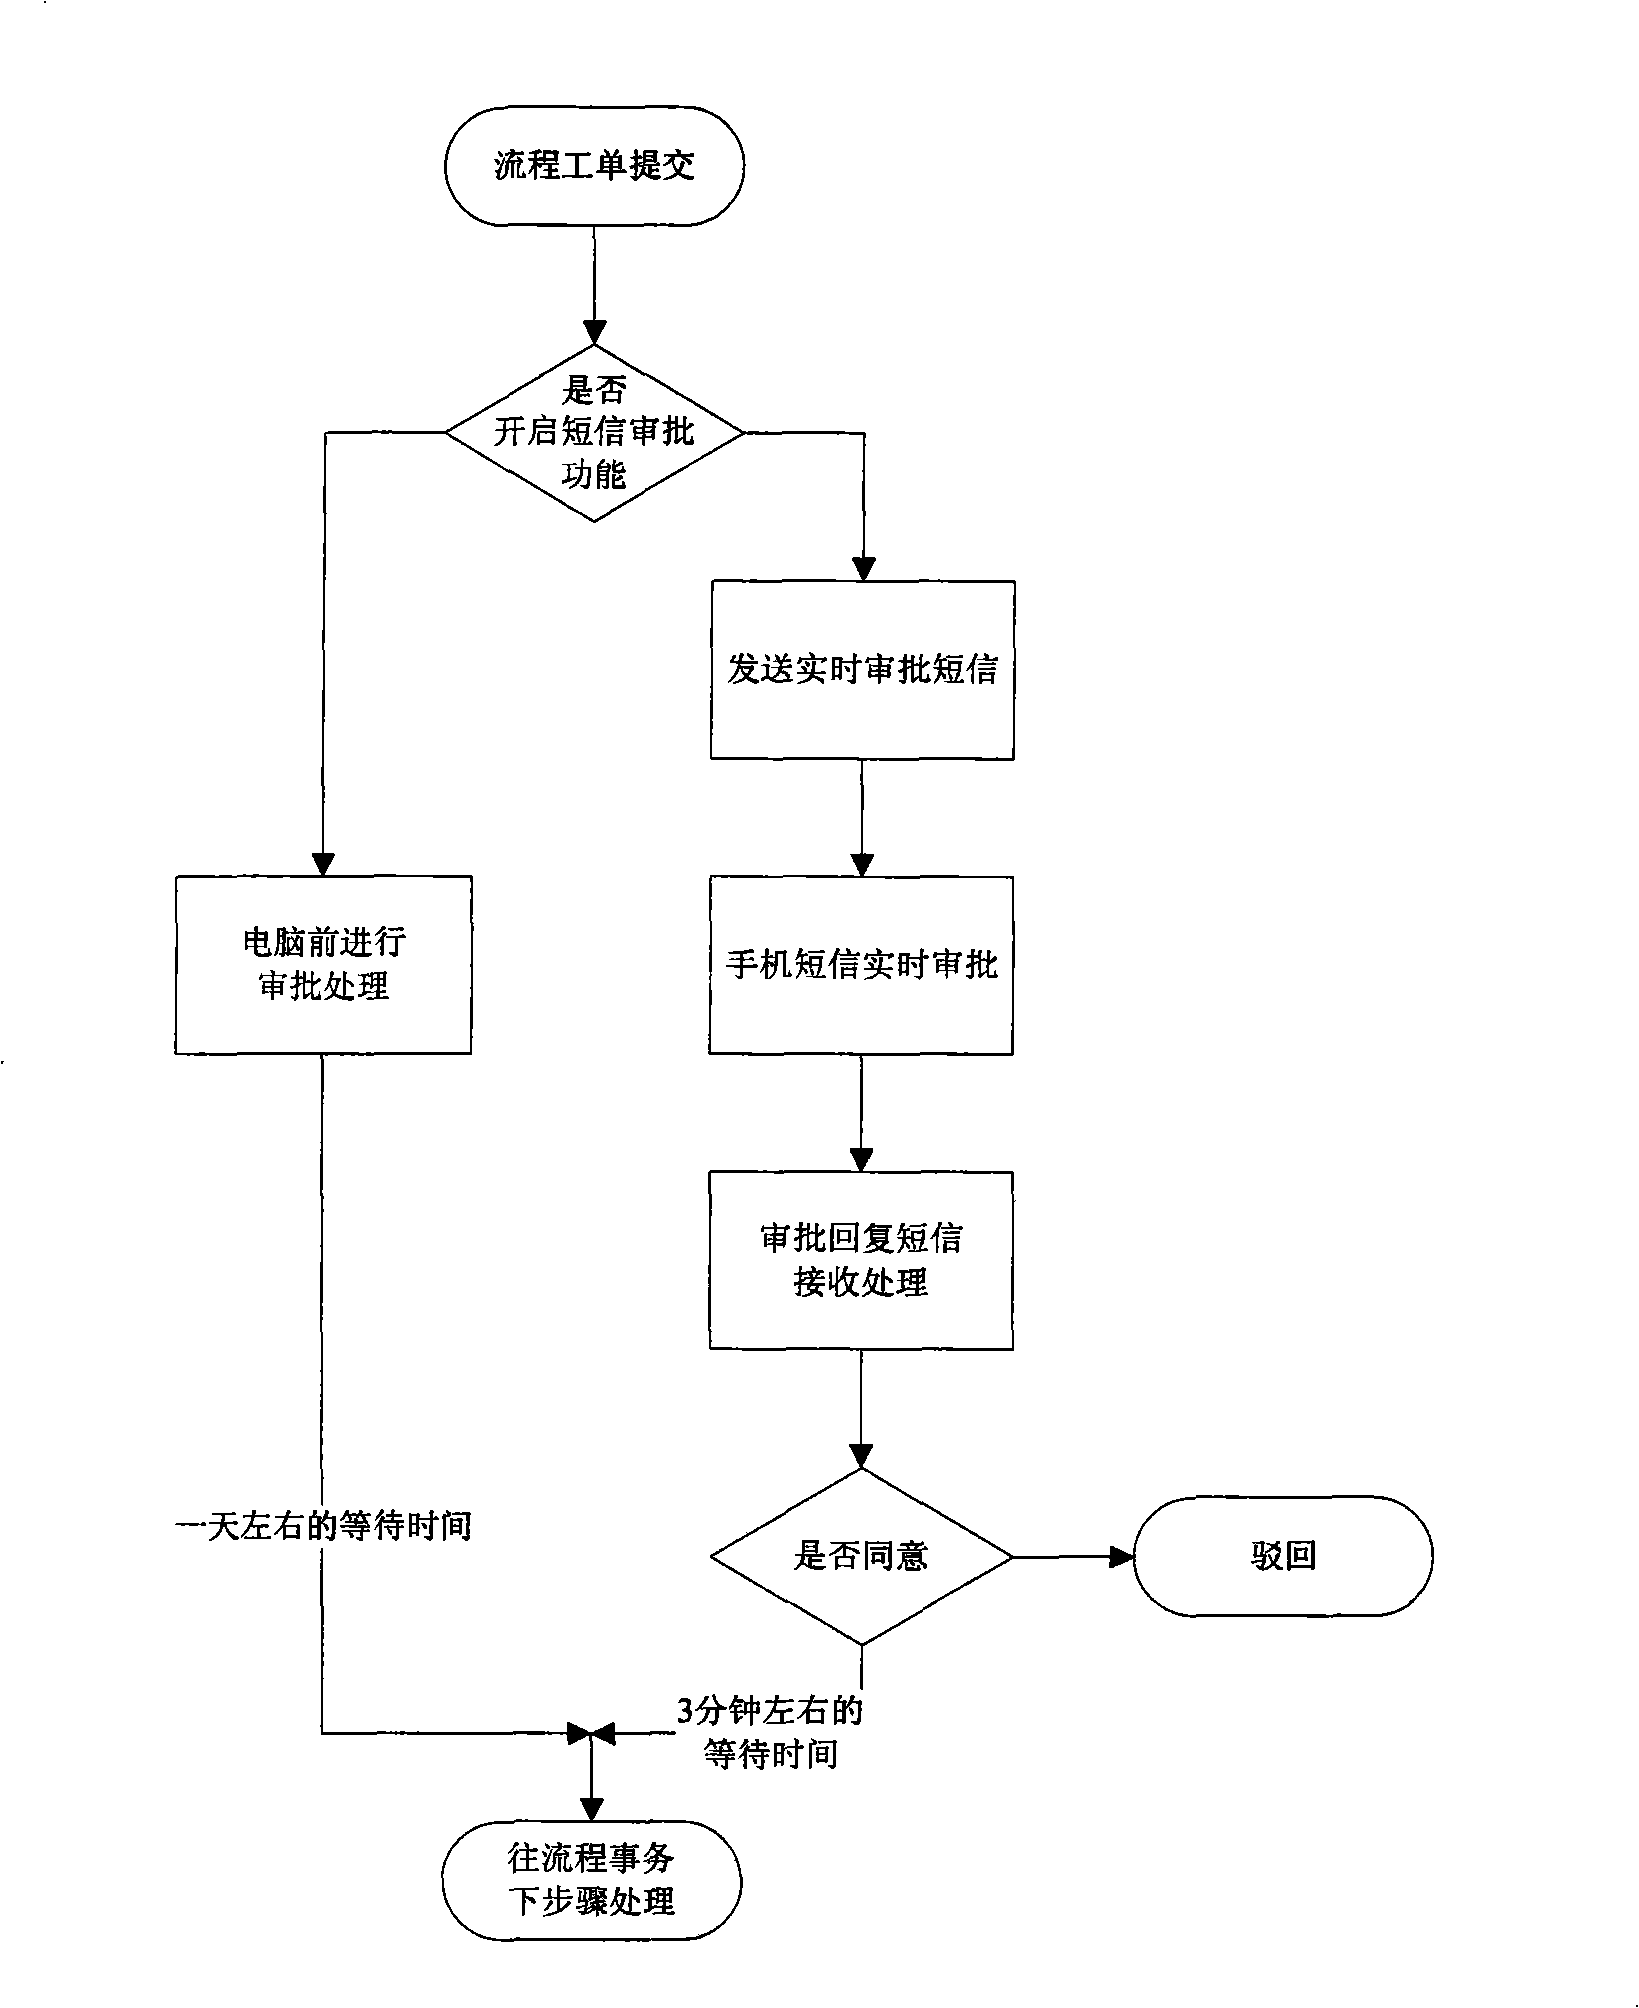 Method and apparatus for work examination and approval process flow of mobile phone SMS